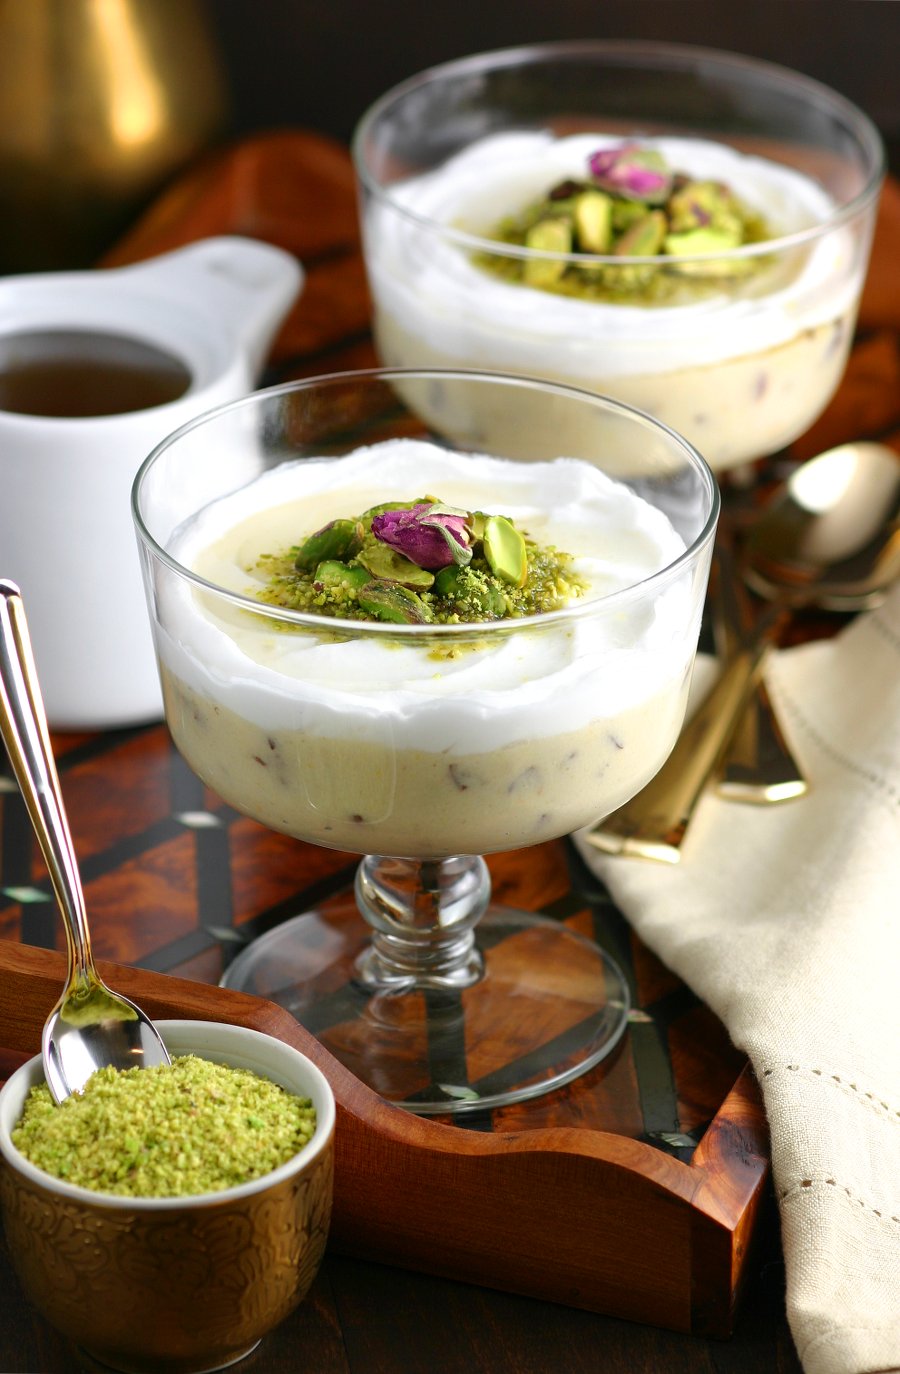 A very popular dessert throughout the Middle East, this Lebanese Semolina Pudding (Layali Lubnan) includes sweet-tart cranberries, thick coconut cream, ground pistachios, and a floral-scented syrup. This vegan recipe can be whipped up quickly, then it chills in the fridge until you are ready to dig in.